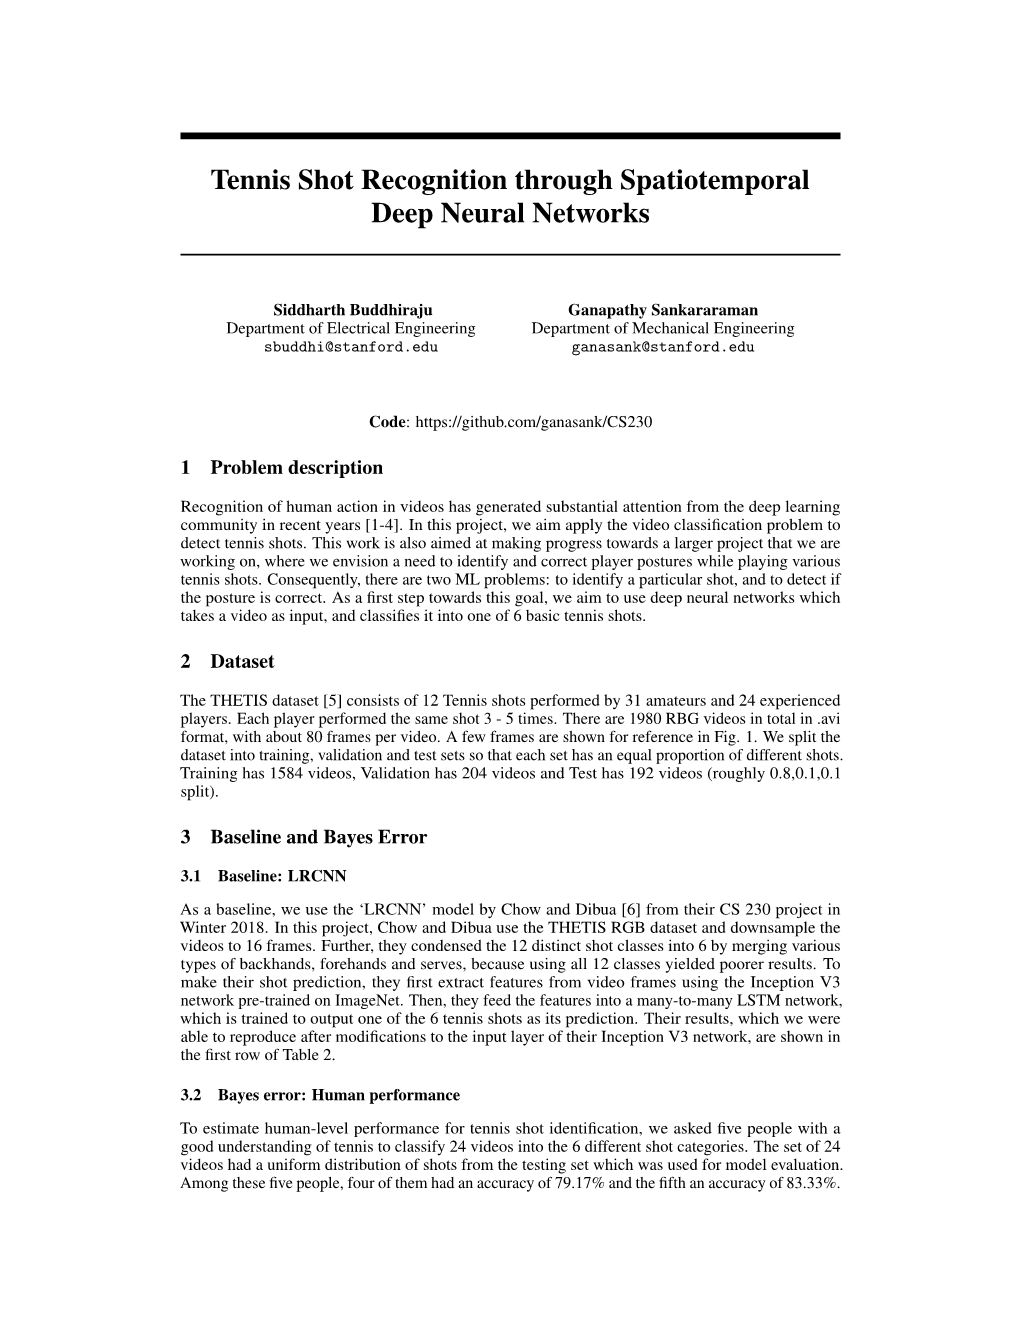 Tennis Shot Recognition Through Spatiotemporal Deep Neural Networks